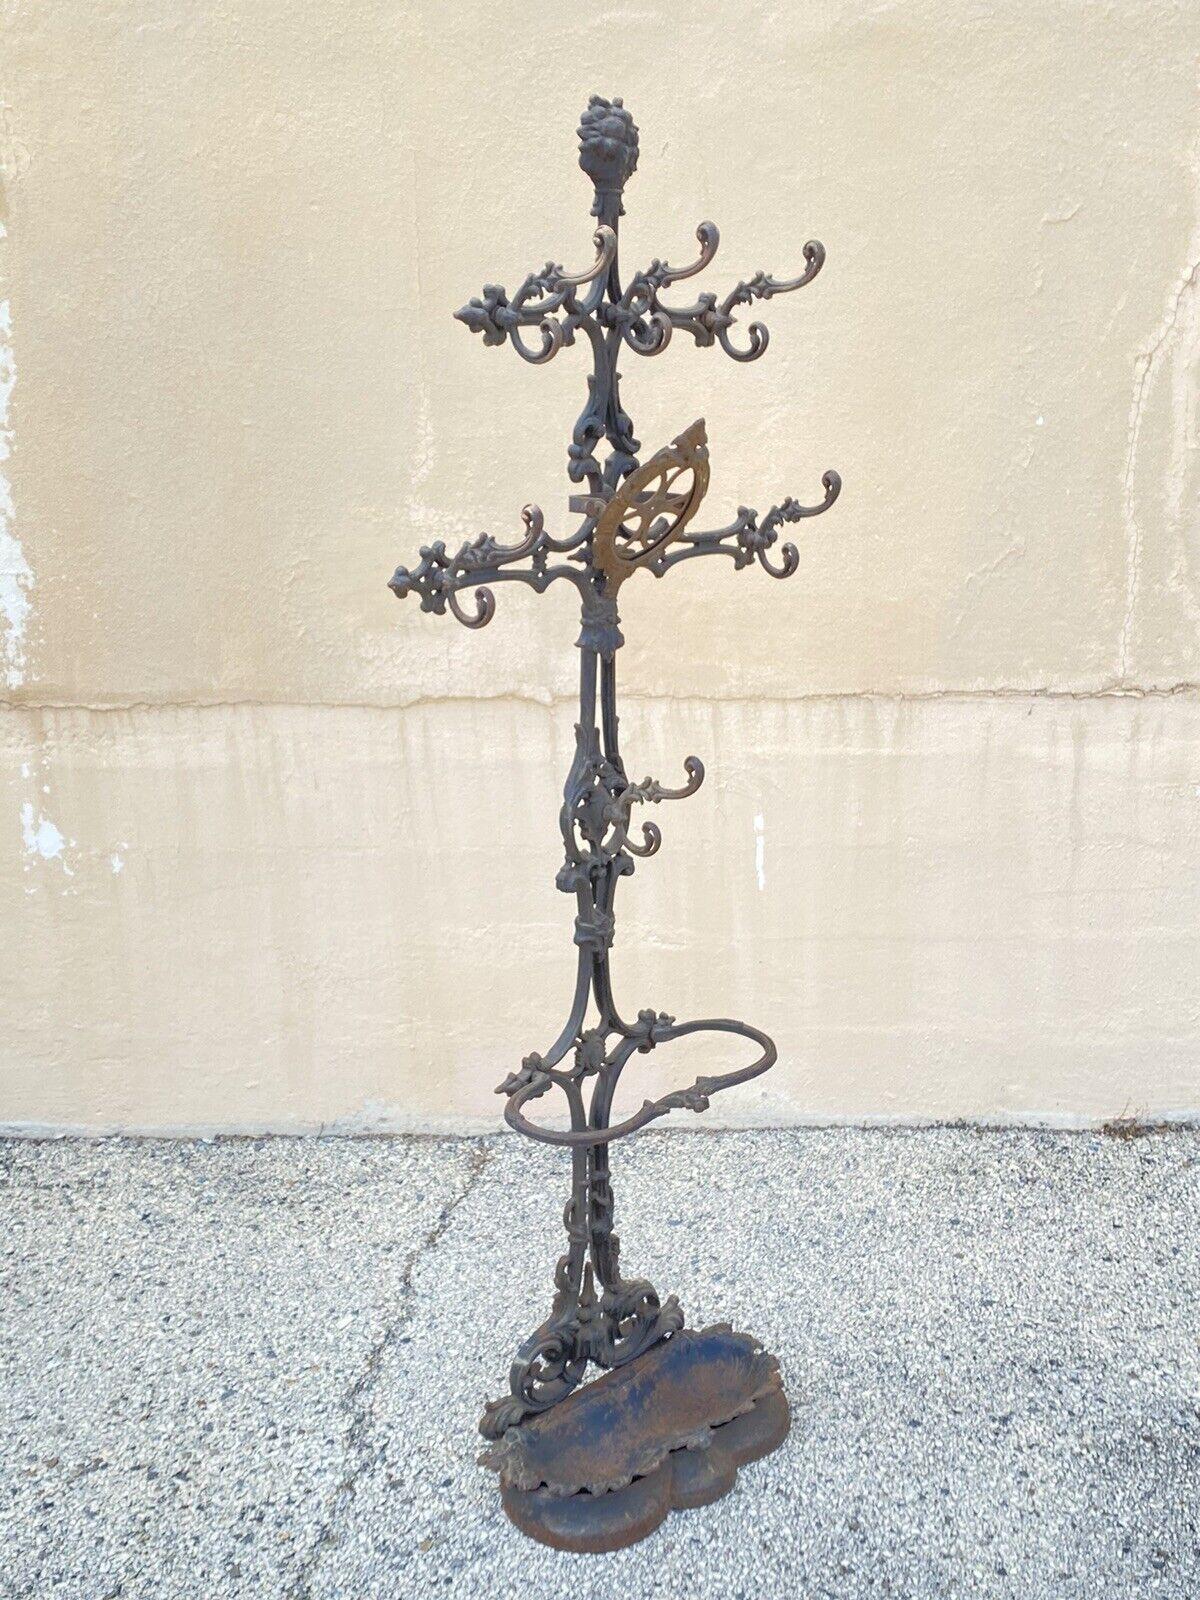 19th Century Antique Victorian Cast Iron Rococo Hall Tree Coat Hook Umbrella Stand. Item features multiple ornate hooks, removable cast iron drip pan, frame for central mirror (glass missing, cast iron construction, very nice antique item, quality